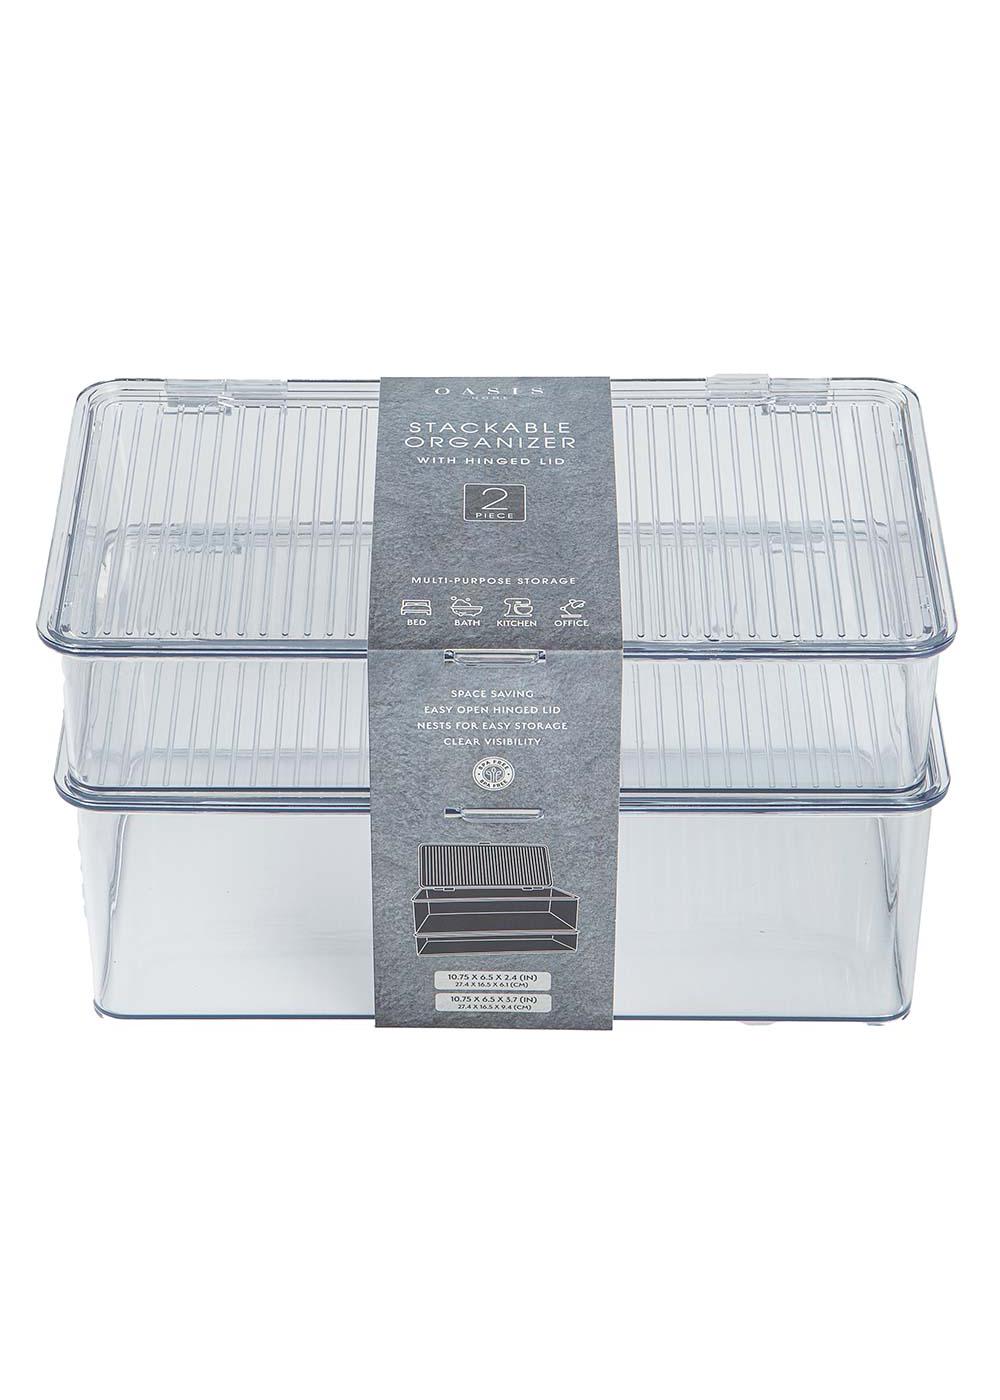 Oasis Home Stackable Organizer with Hinged Lid; image 1 of 3